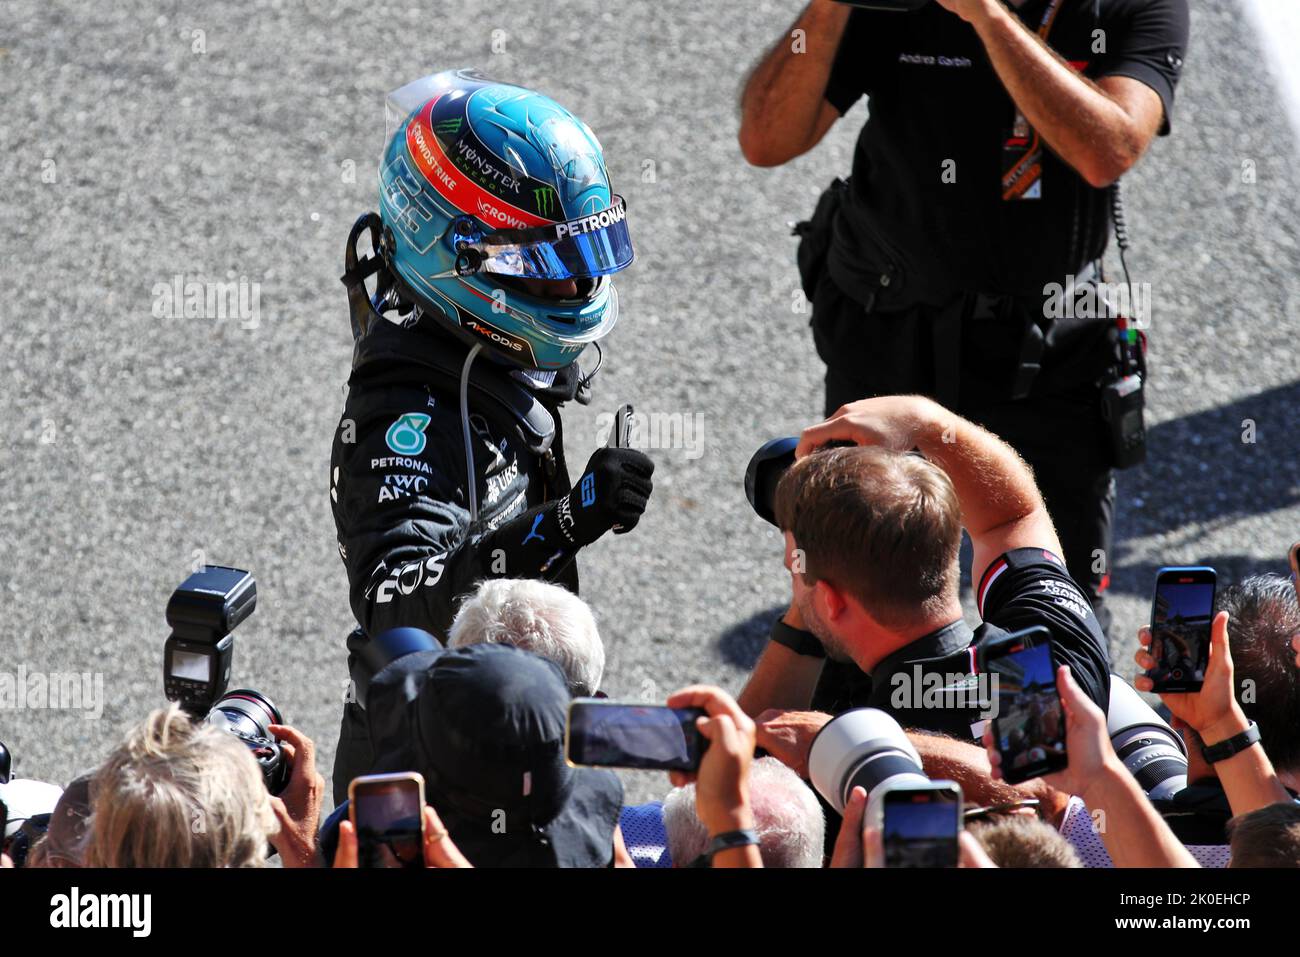 Monza, Italy. 11th Sep, 2022. George Russell (GBR) Mercedes AMG F1 celebrates his third position in parc ferme. Italian Grand Prix, Sunday 11th September 2022. Monza Italy. Credit: James Moy/Alamy Live News Stock Photo